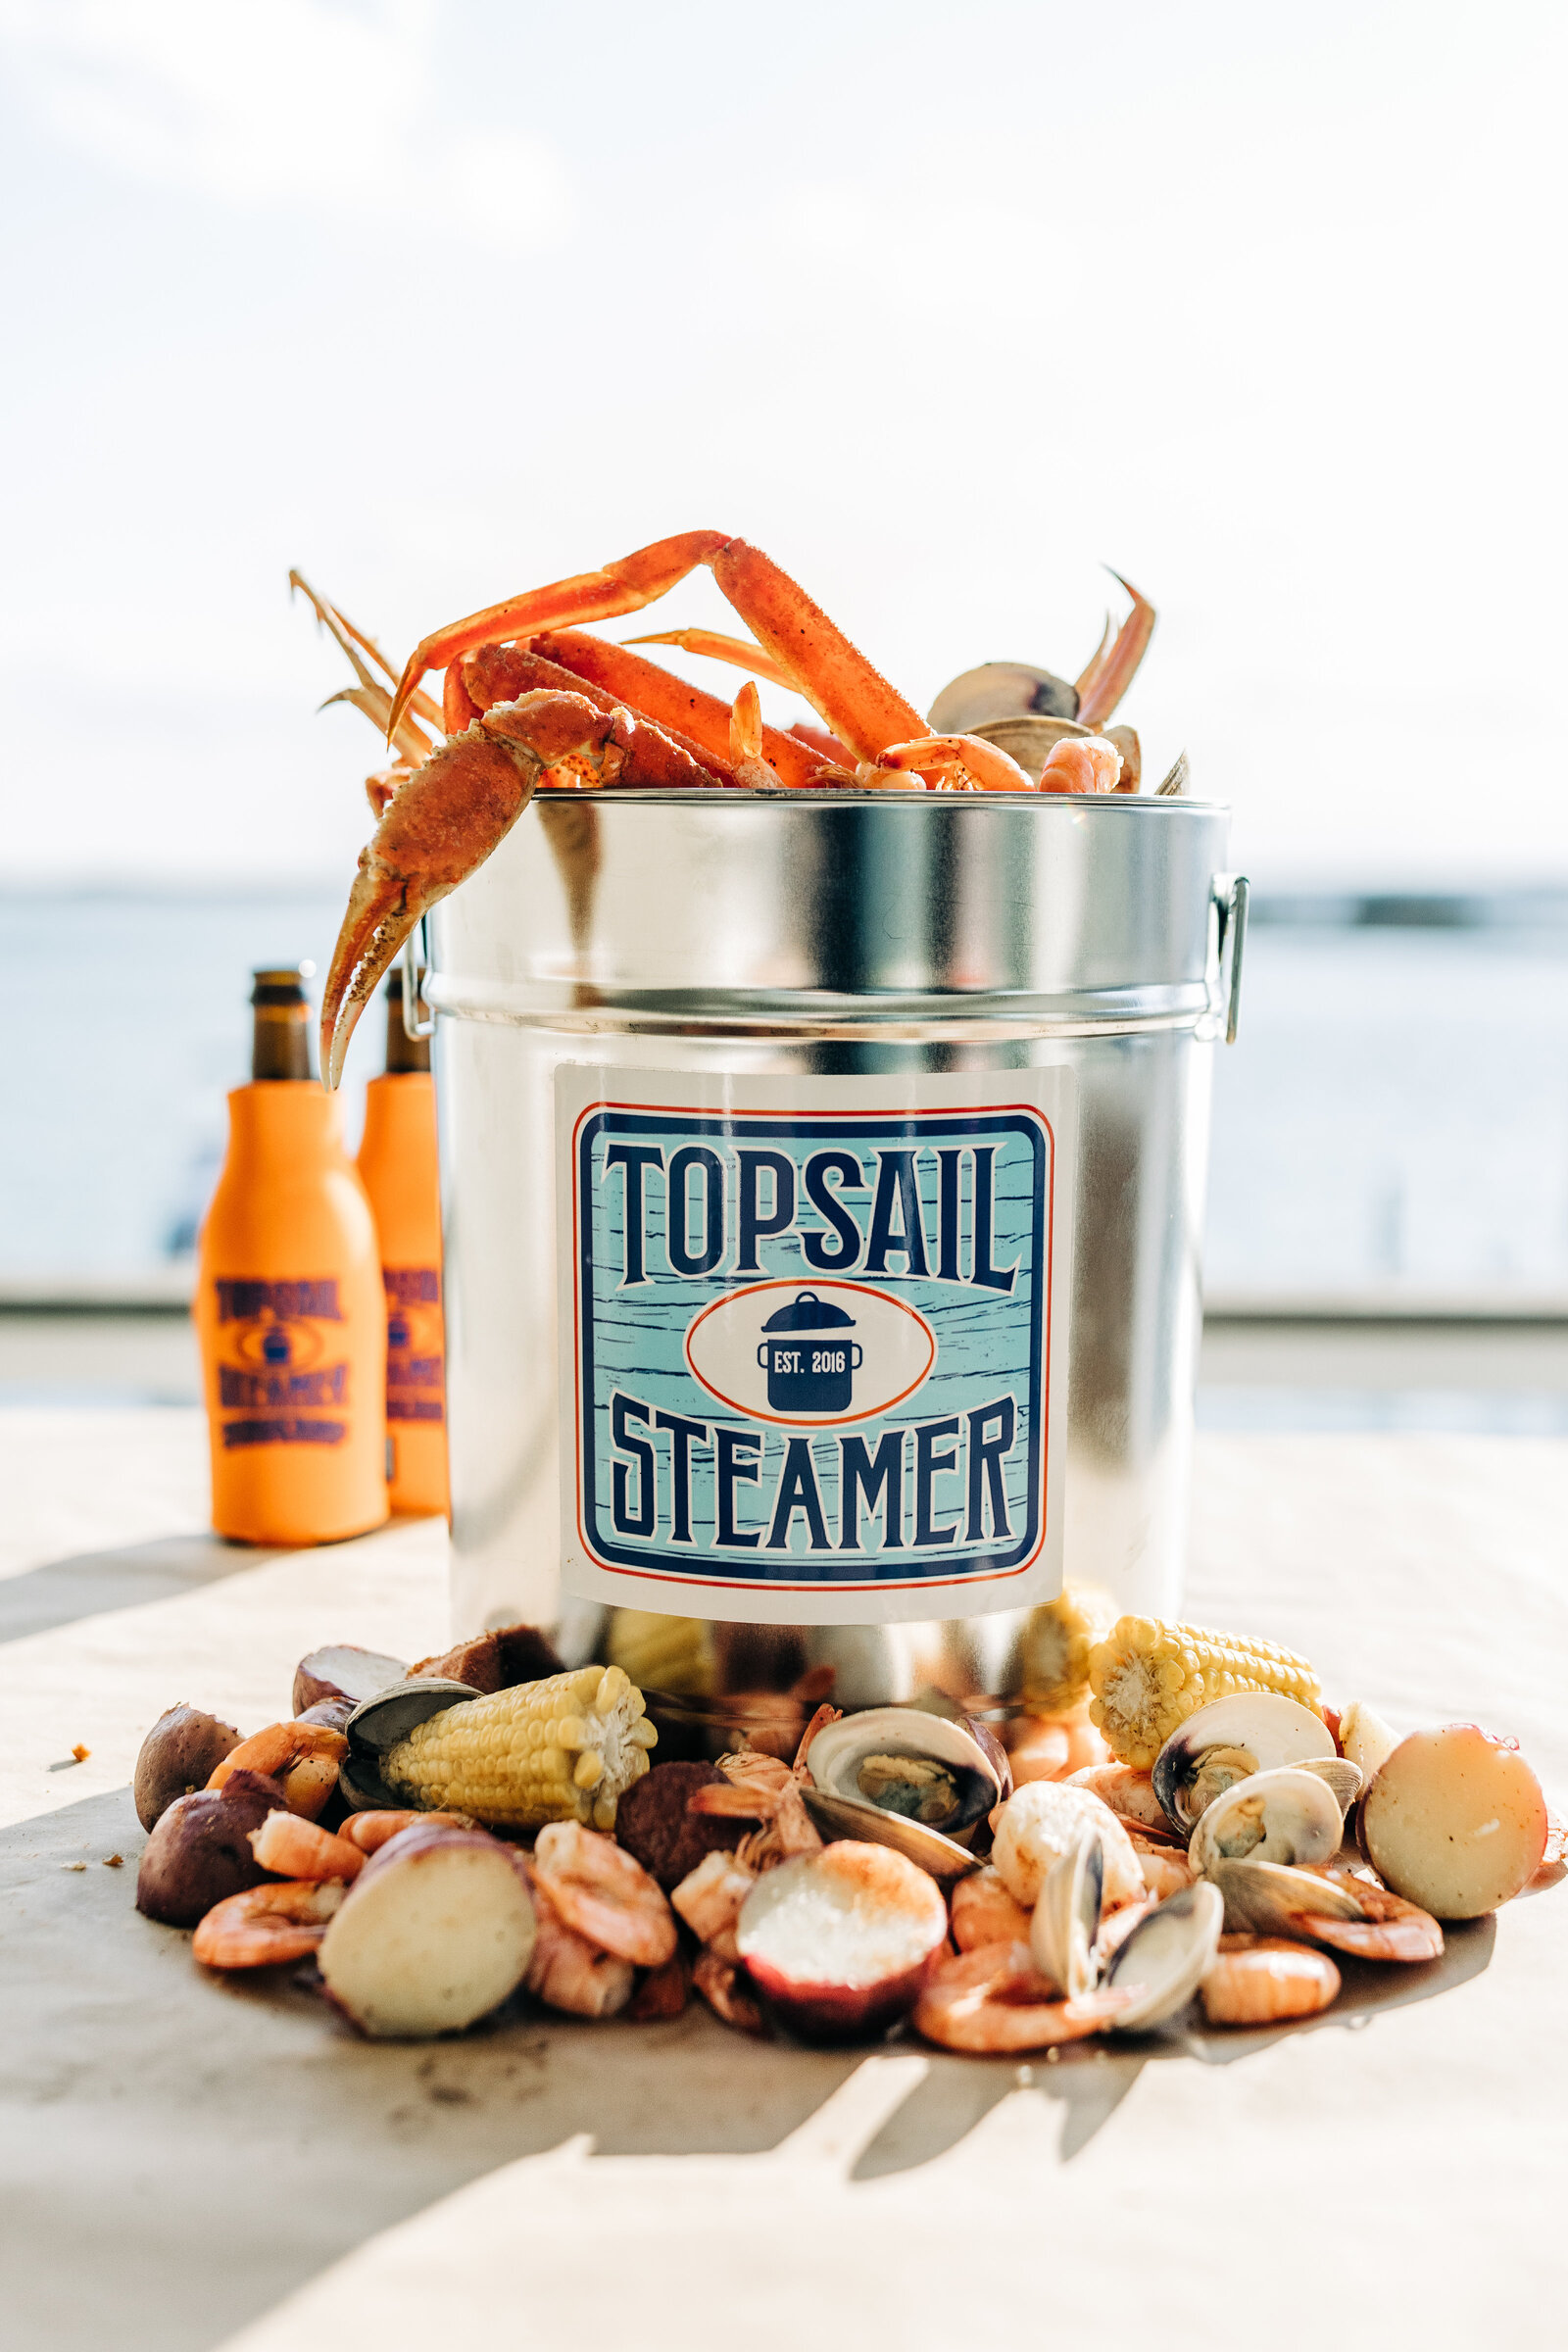 Topsail Steamer Commercial photo Shoot  | Wilmington NC | The Axtells Photo and Film